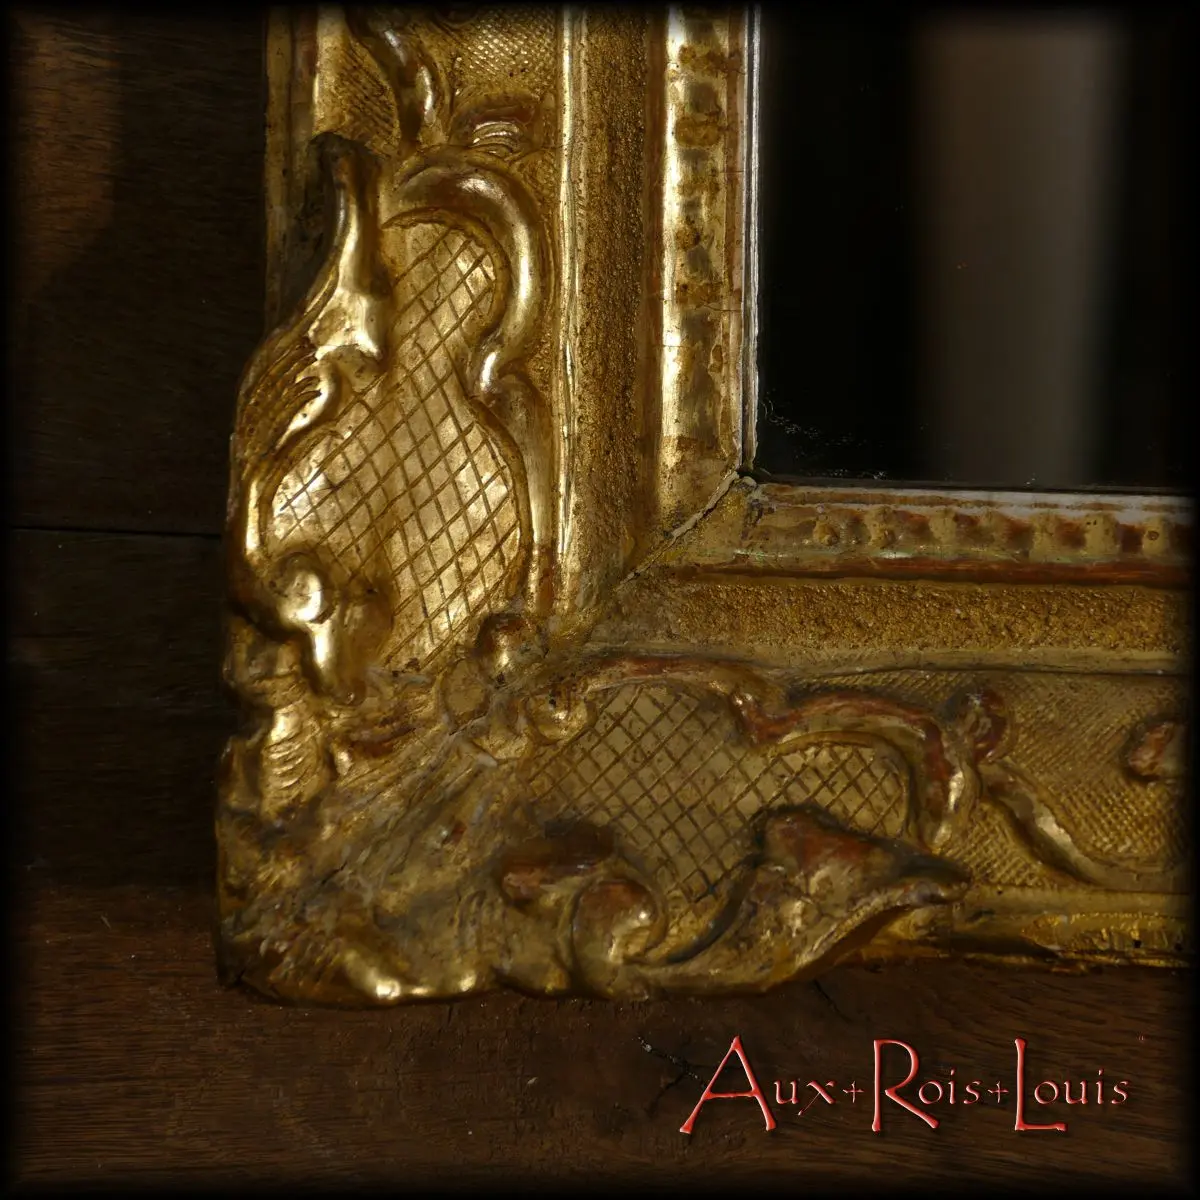 Closer up, you can see the Armenian bole in a red ocher hue which, over the centuries, has reappeared, accentuating the contrasts and nuances of this Louis XV mirror.